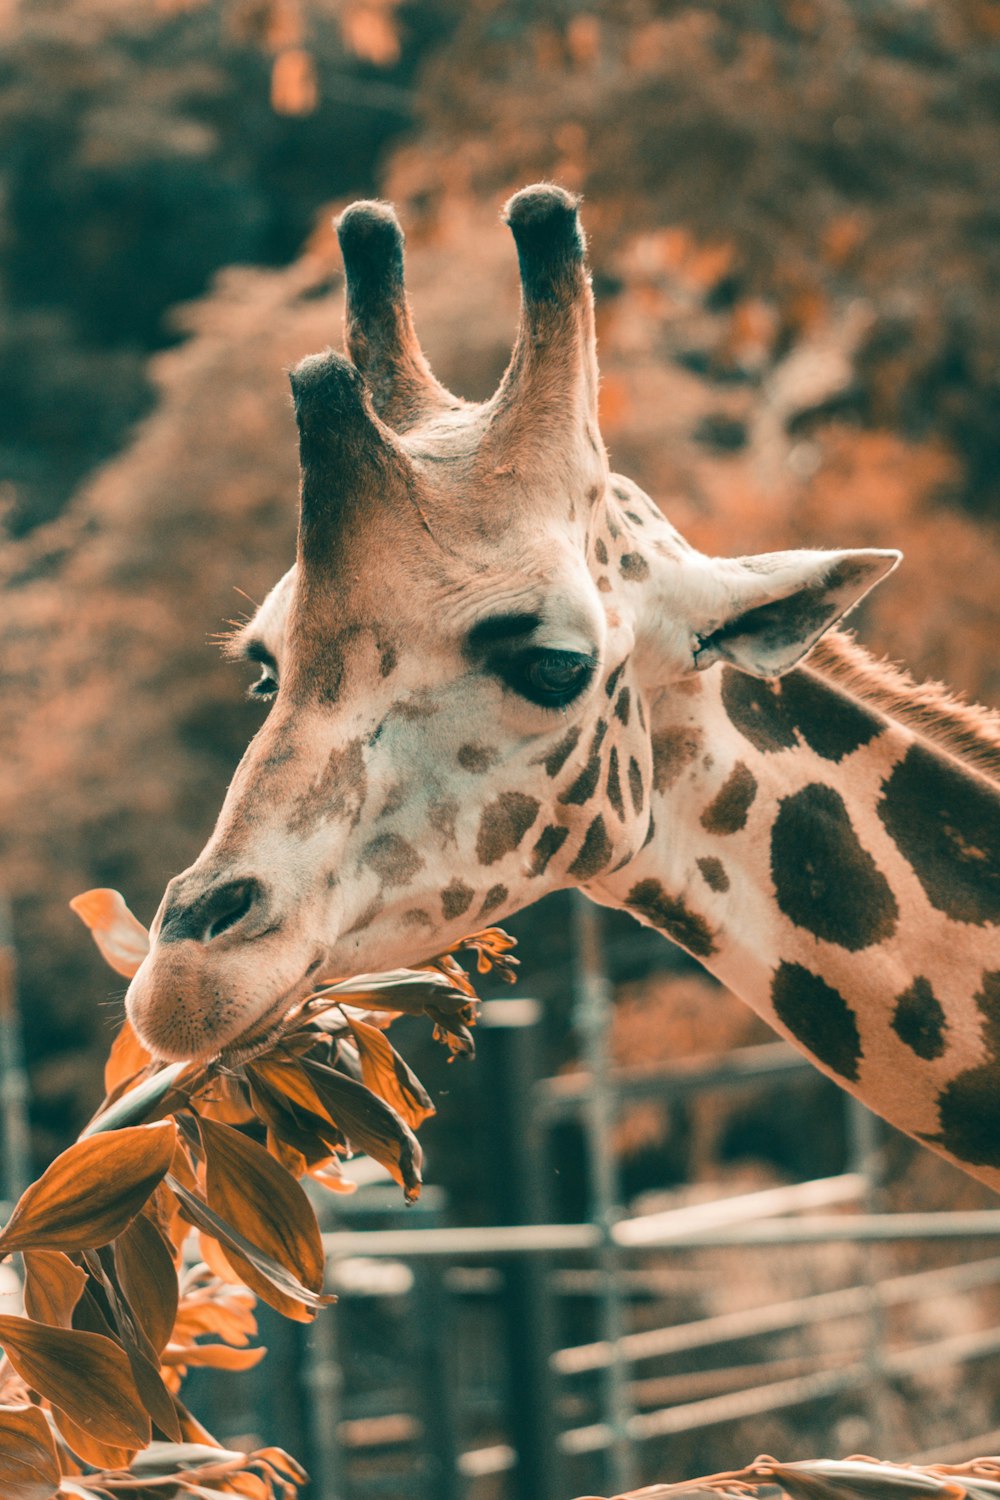 giraffe eating brown dried leaves during daytime